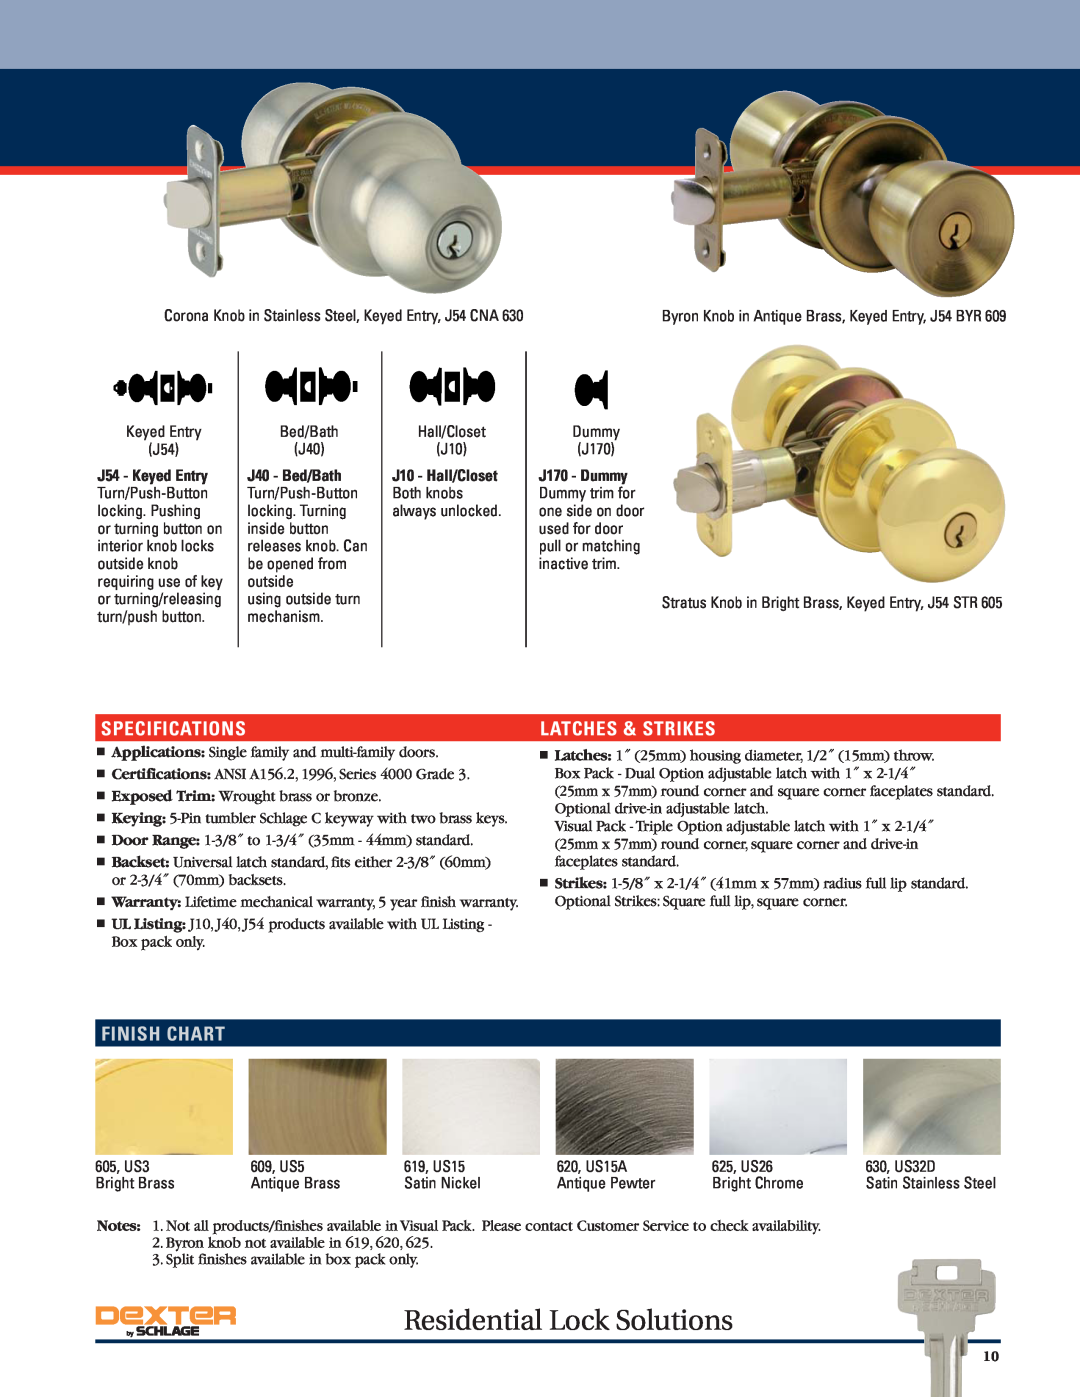 Schlage manual Residential Lock Solutions, Specifications, Latches & Strikes, Finish Chart 